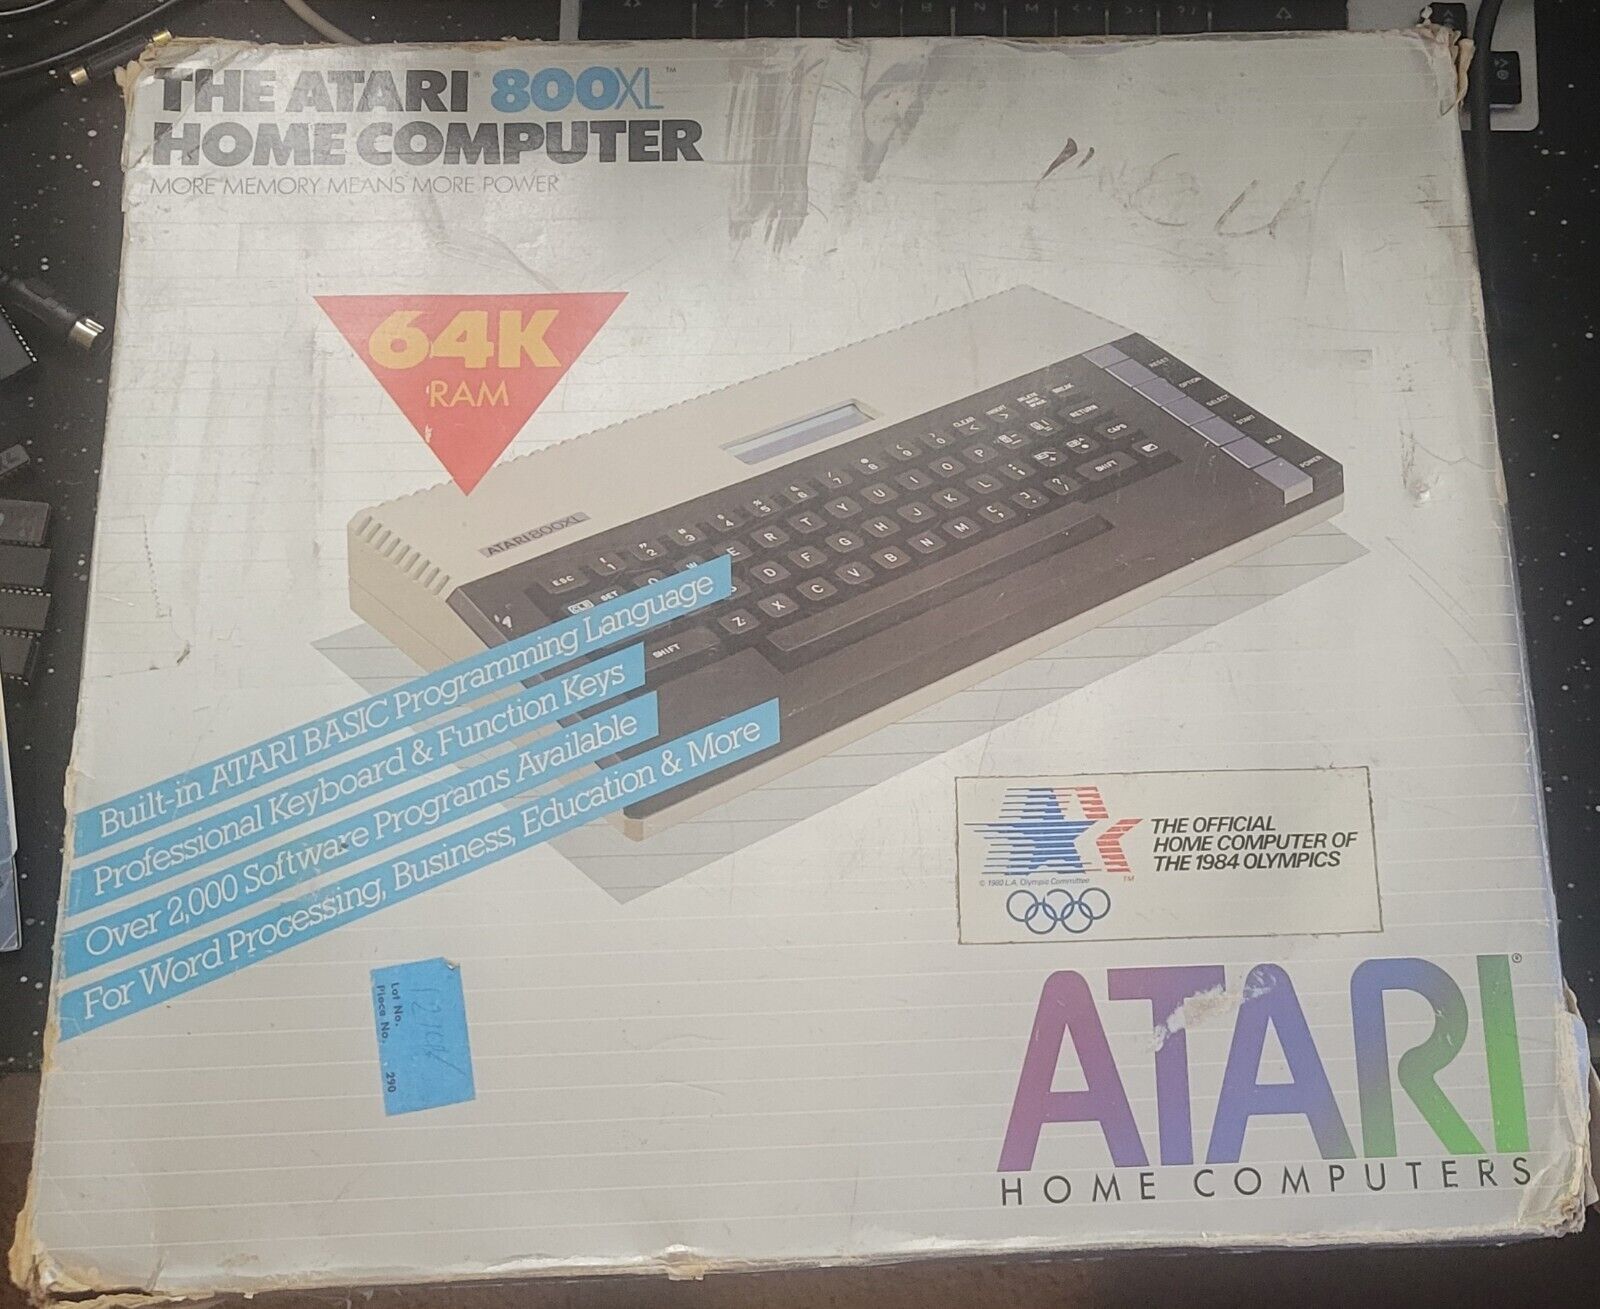 Atari 800XL Computer with Chroma Added - Original Box - Tested and Working 100%